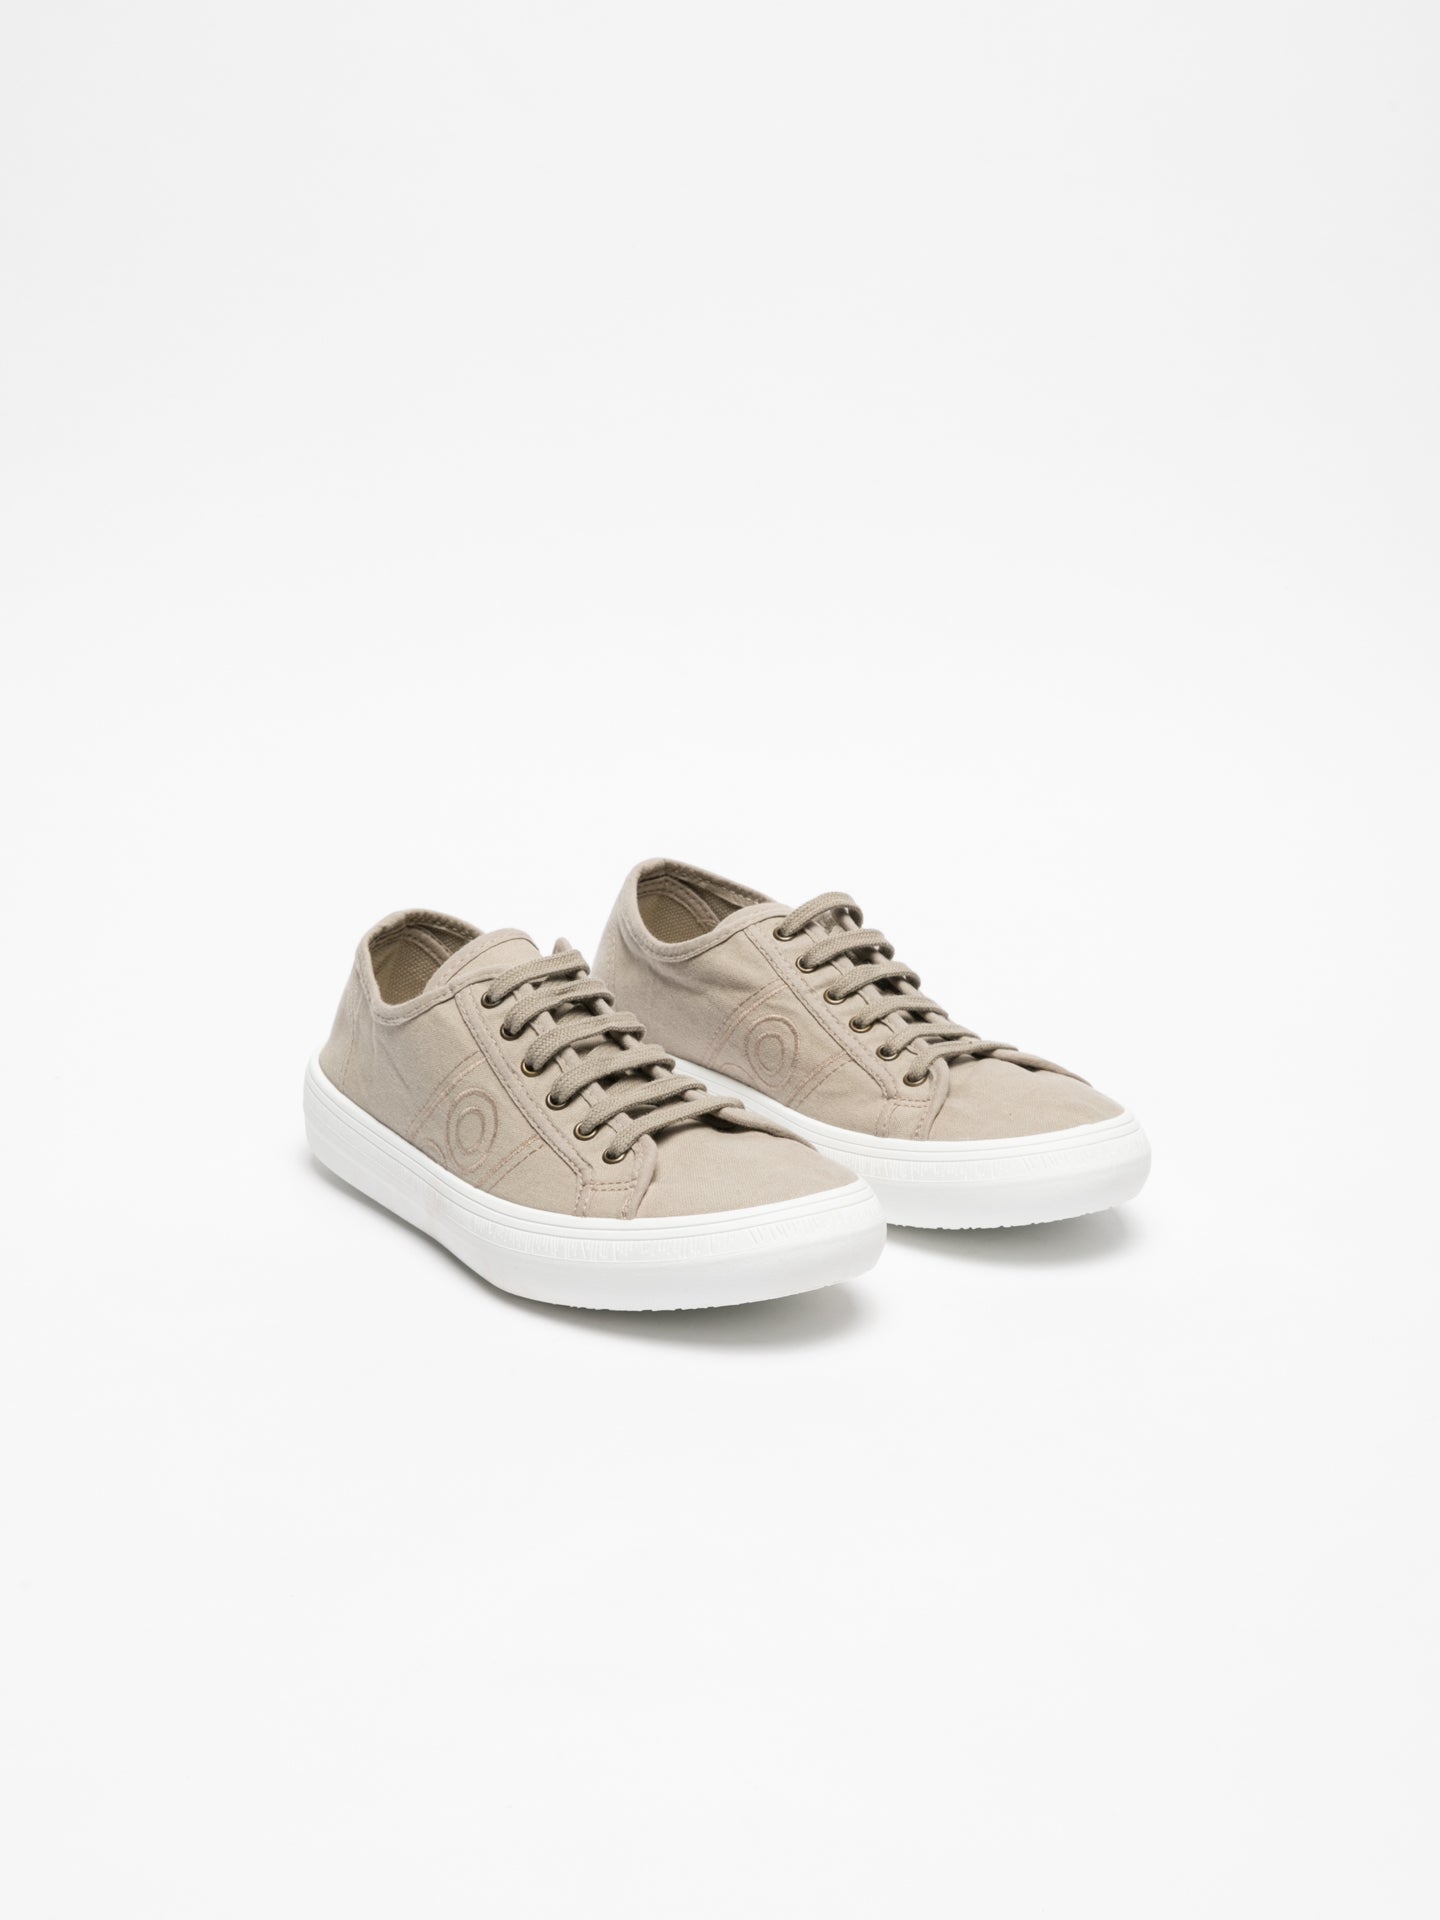 Foreva Tan Lace-up Trainers